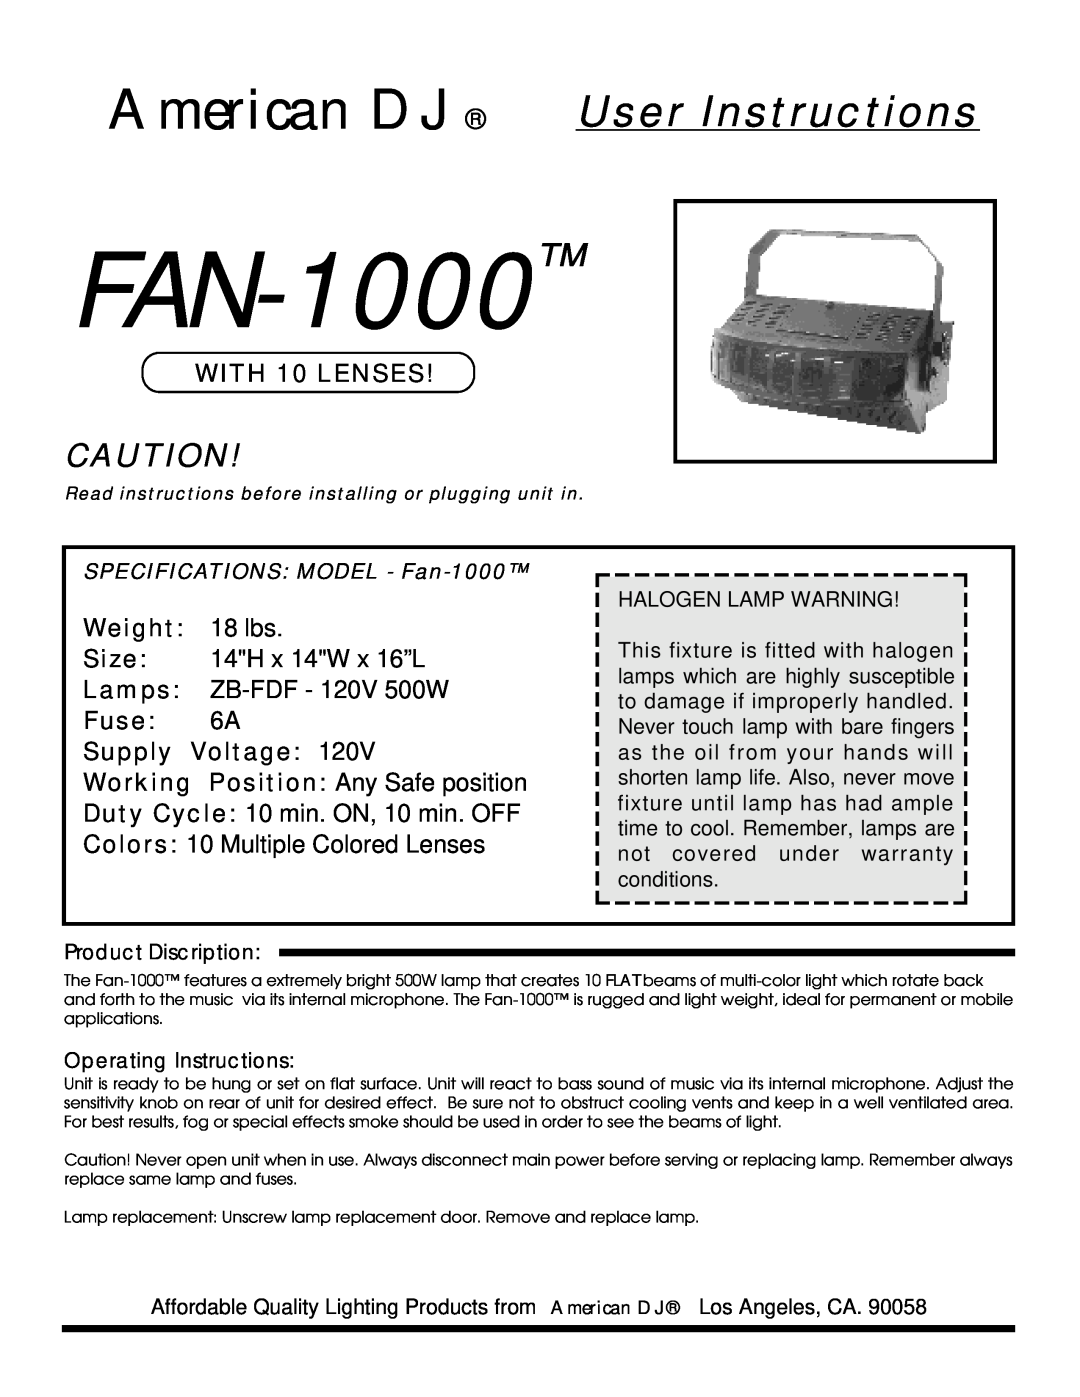 American DJ Fan-1000 specifications FAN-1000, American DJ User Instructions, WITH 10 LENSES, Weight, 18 lbs, Size, Lamps 